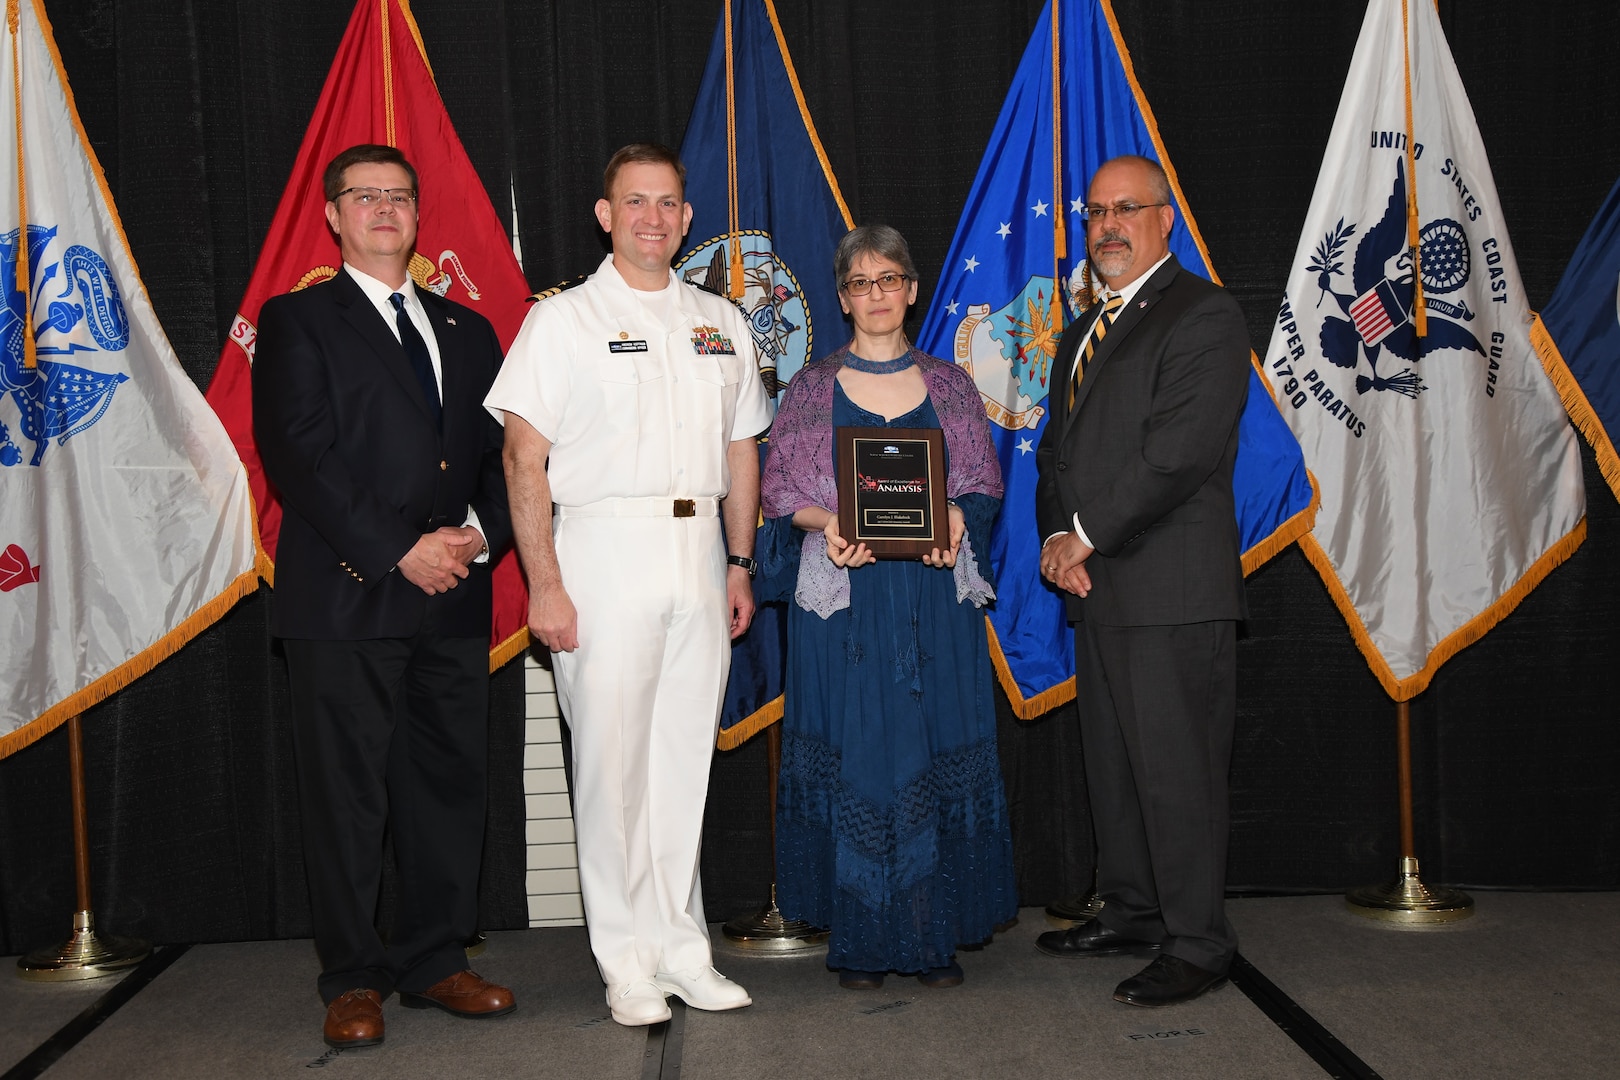 IMAGE: Carolyn Blakelock is presented the NSWCDD Award of Excellence for Analysis at Naval Surface Warfare Center Dahlgren Division's annual awards ceremony, Apr. 26 at the Fredericksburg Expo and Conference Center.

The NSWCDD Award of Excellence for Analysis is newly established to recognize individuals who have made a notable and significant impact to NSWCDD through their outstanding performance in analysis - warfare, design, engineering, modeling and simulation.